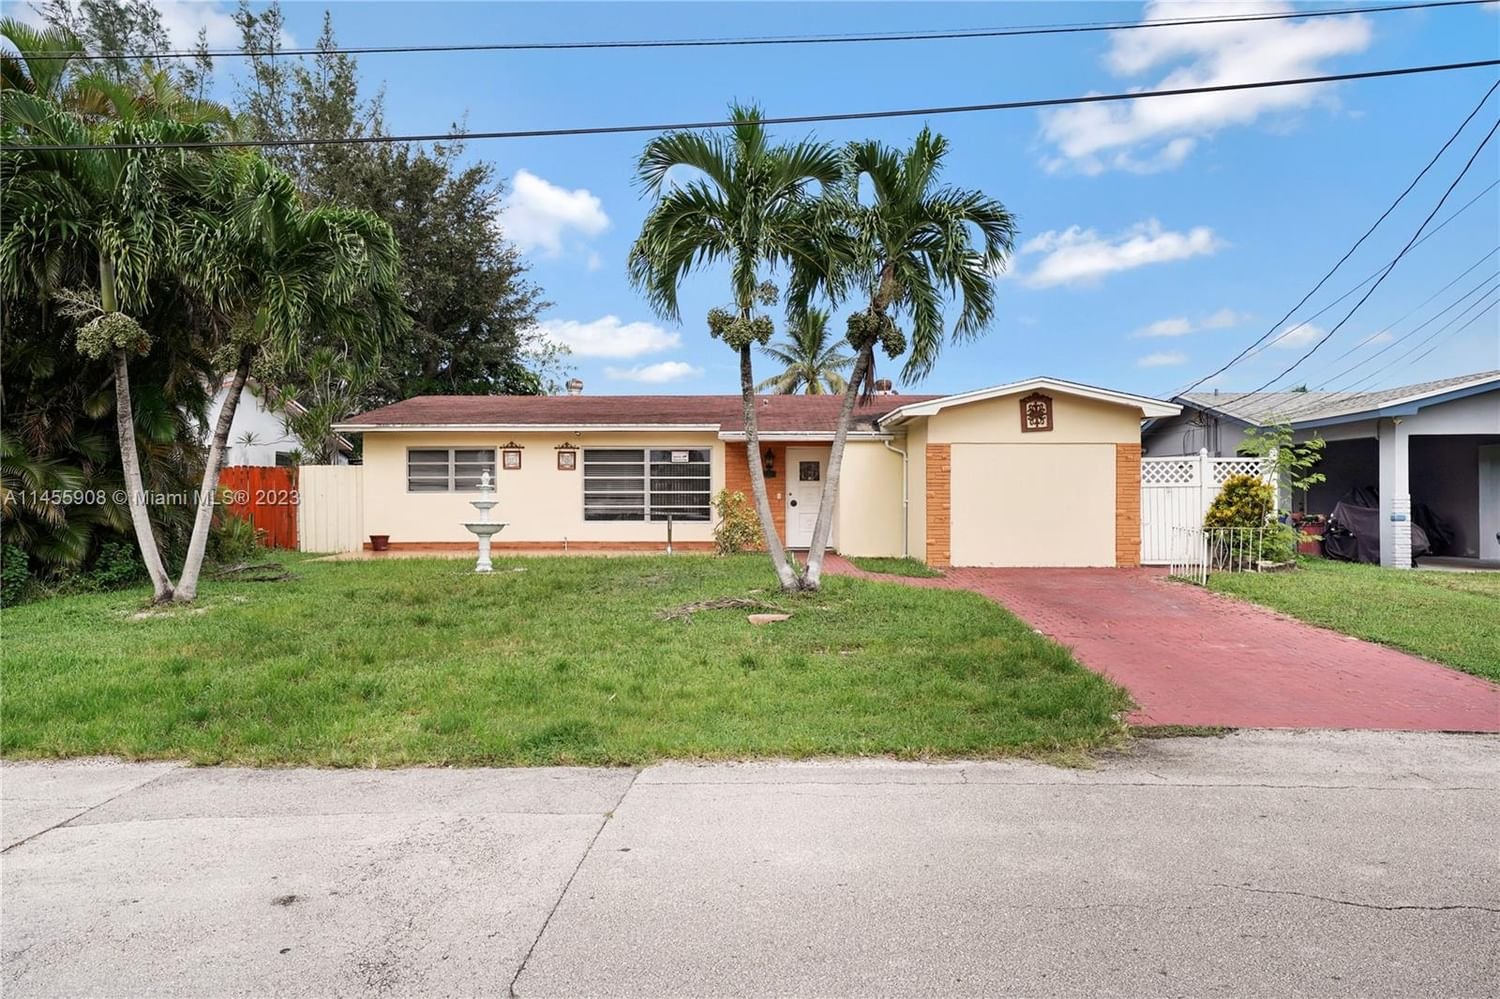 Real estate property located at 251 9th Ave, Broward County, Hallandale Beach, FL